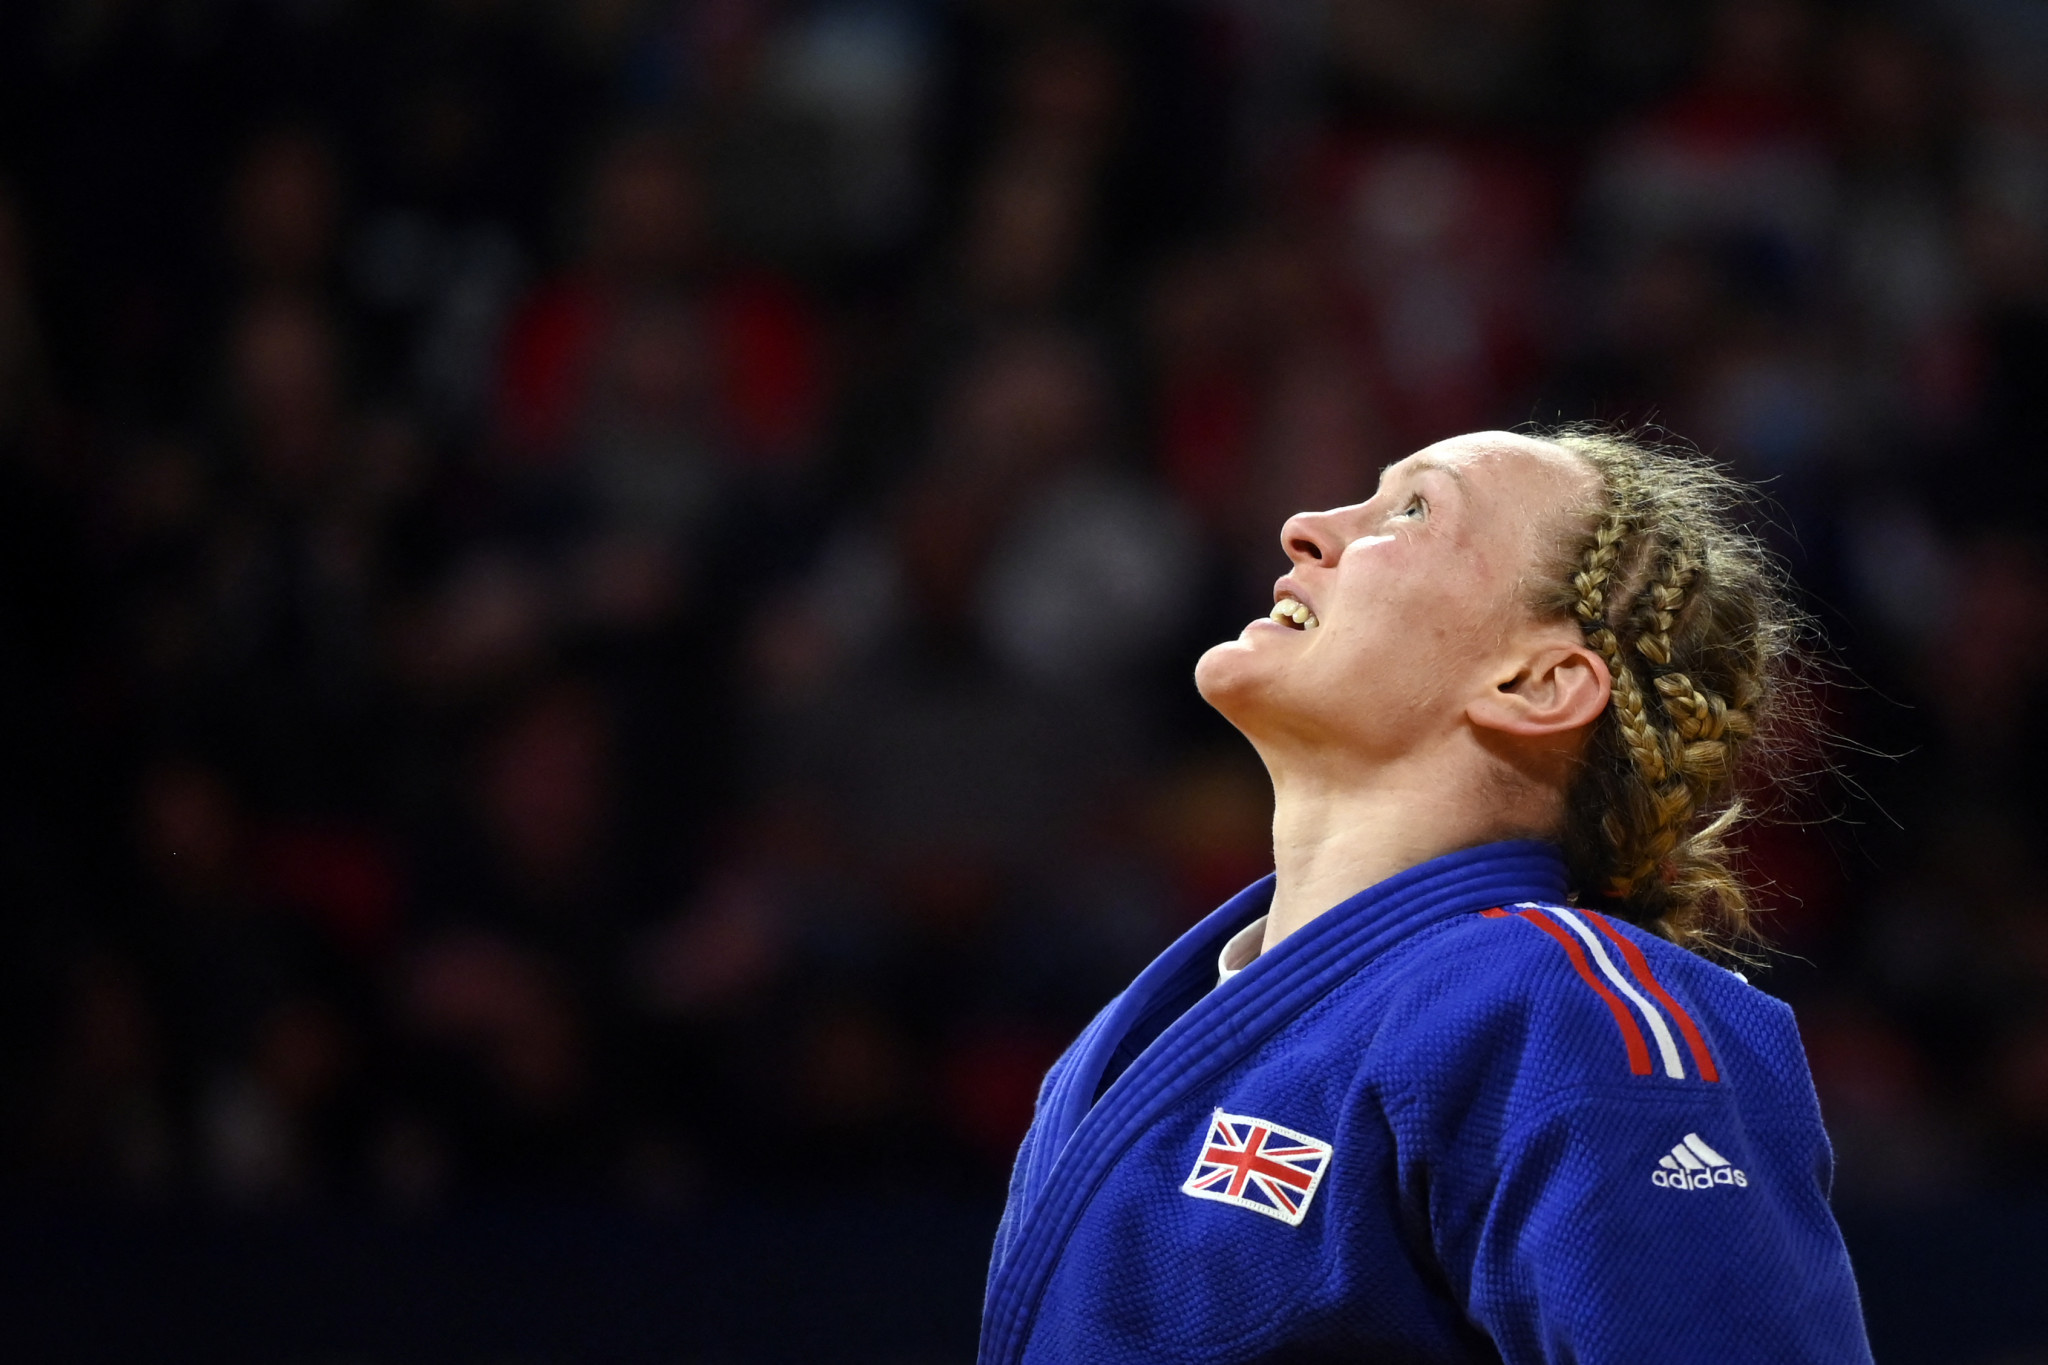 Britain's Gemma Howell celebrates defeating Kosovo's Laura Fazliu in the women's under 63 kg gold medal bout of the European Judo Championships 2022 © NIKOLAY DOYCHINOV/AFP via Getty Images